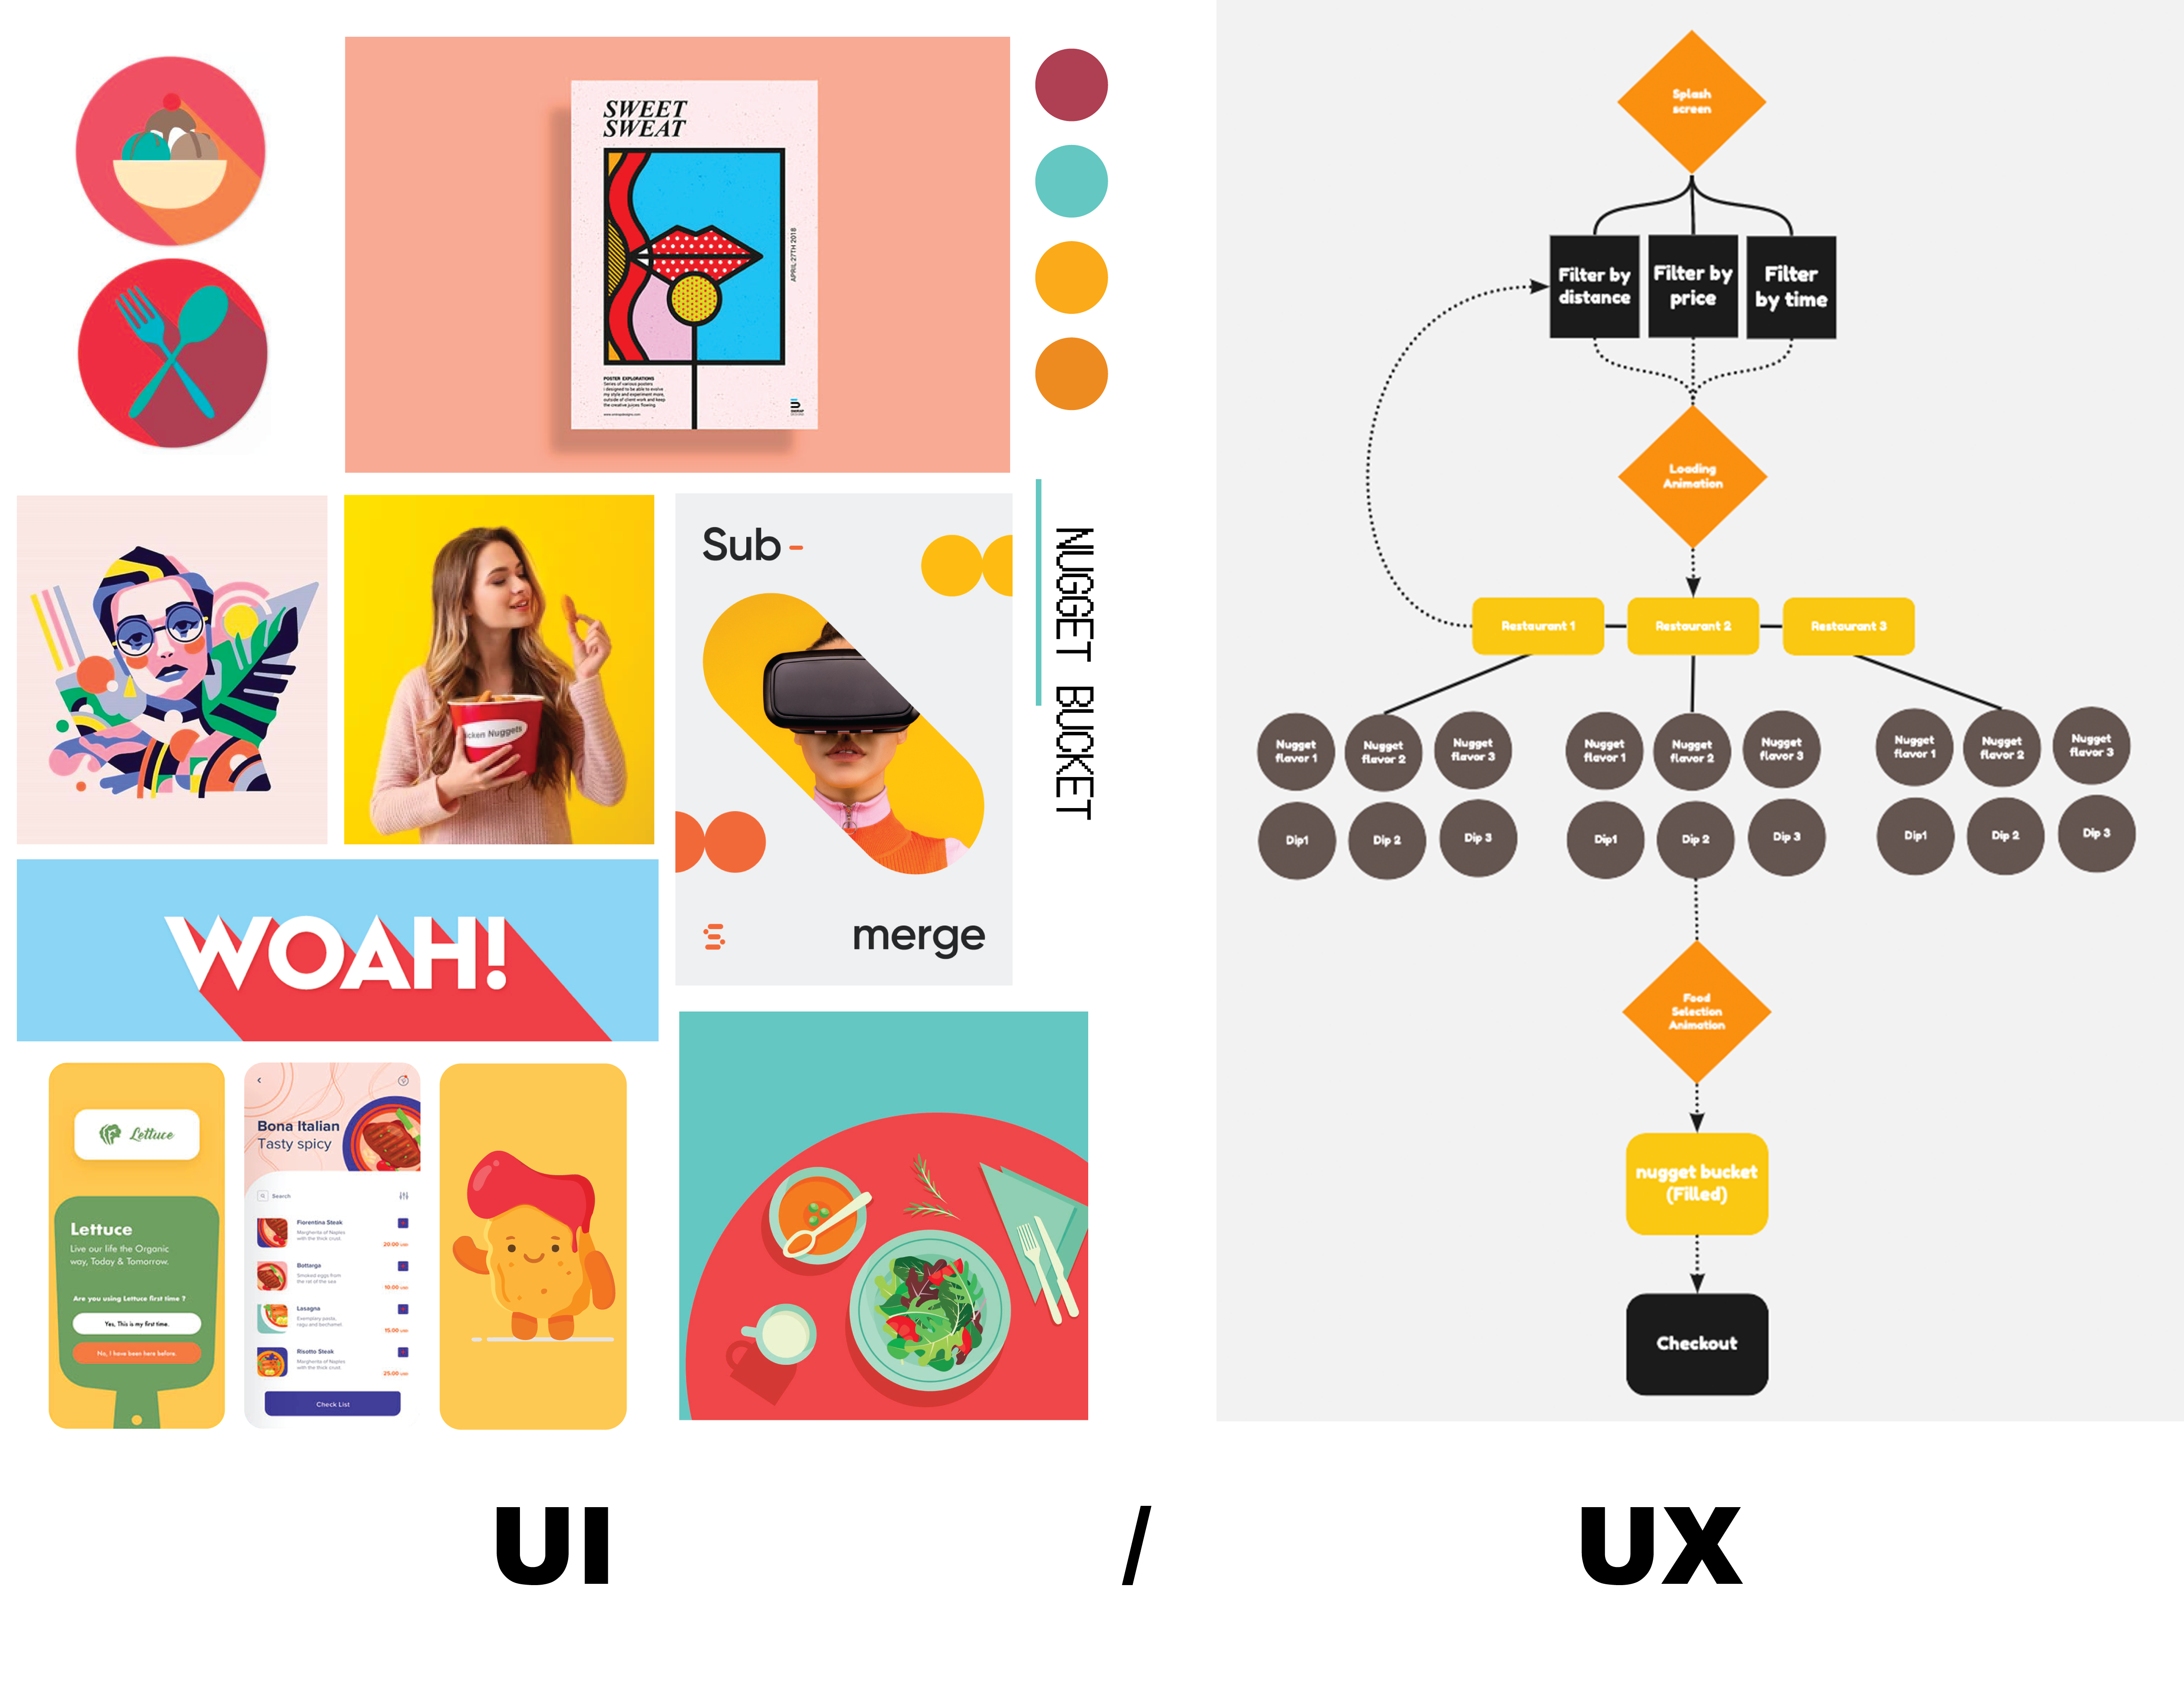 The design process started with a mood board which referenced to the UI side of the application. In parallel, a content map was created after testing; accompanied by a structured sitemap of the interactions that defined the UX side of things.